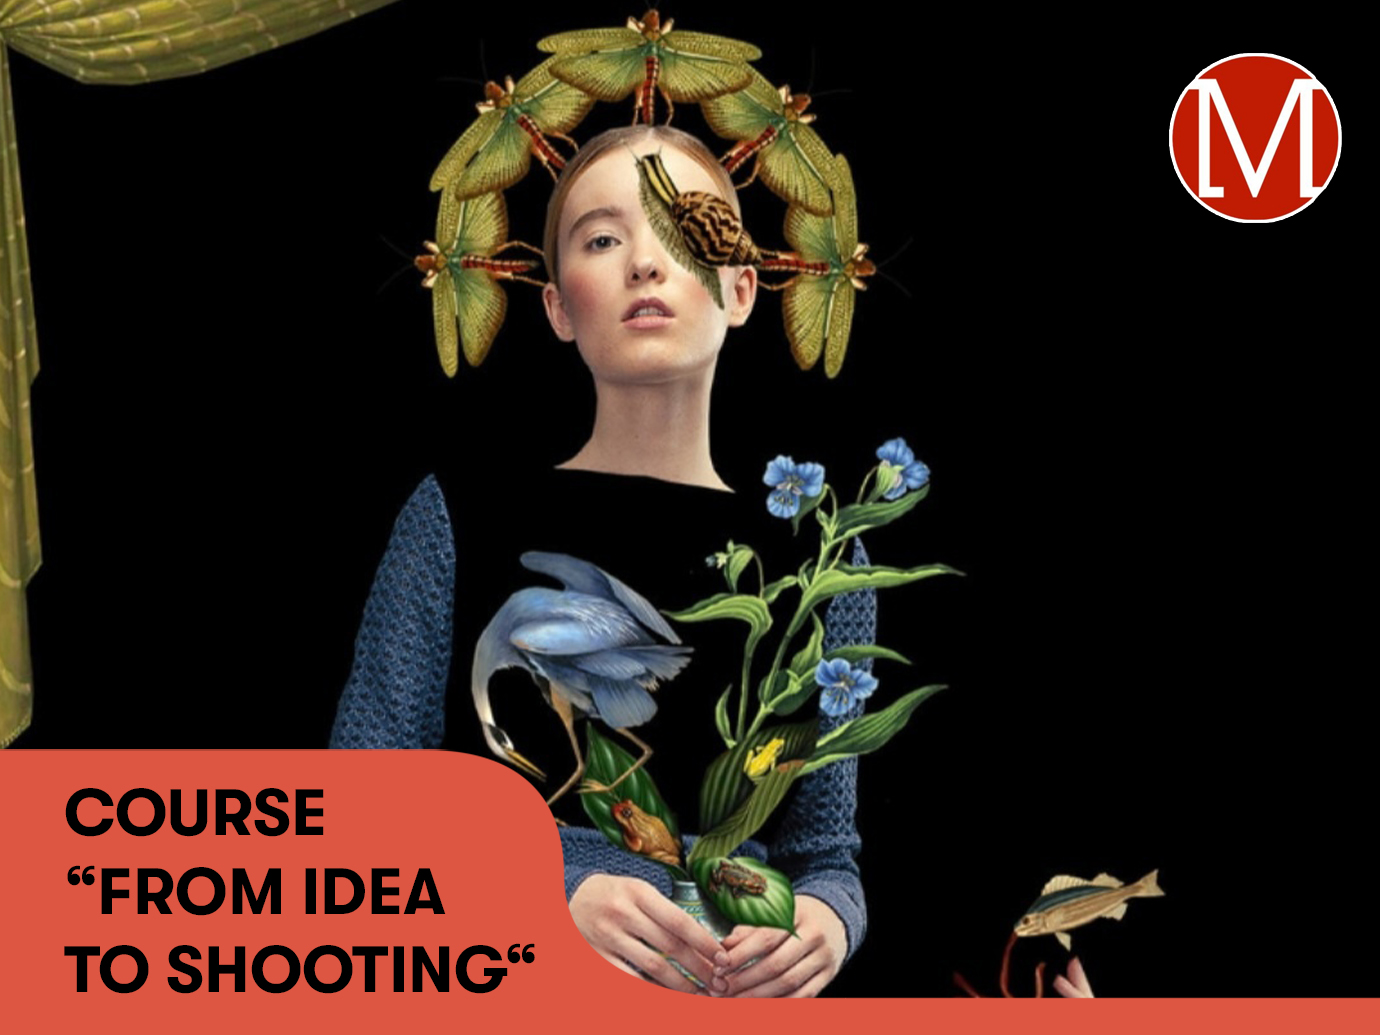 THE COURSE “FROM IDEA TO SHOOTING“